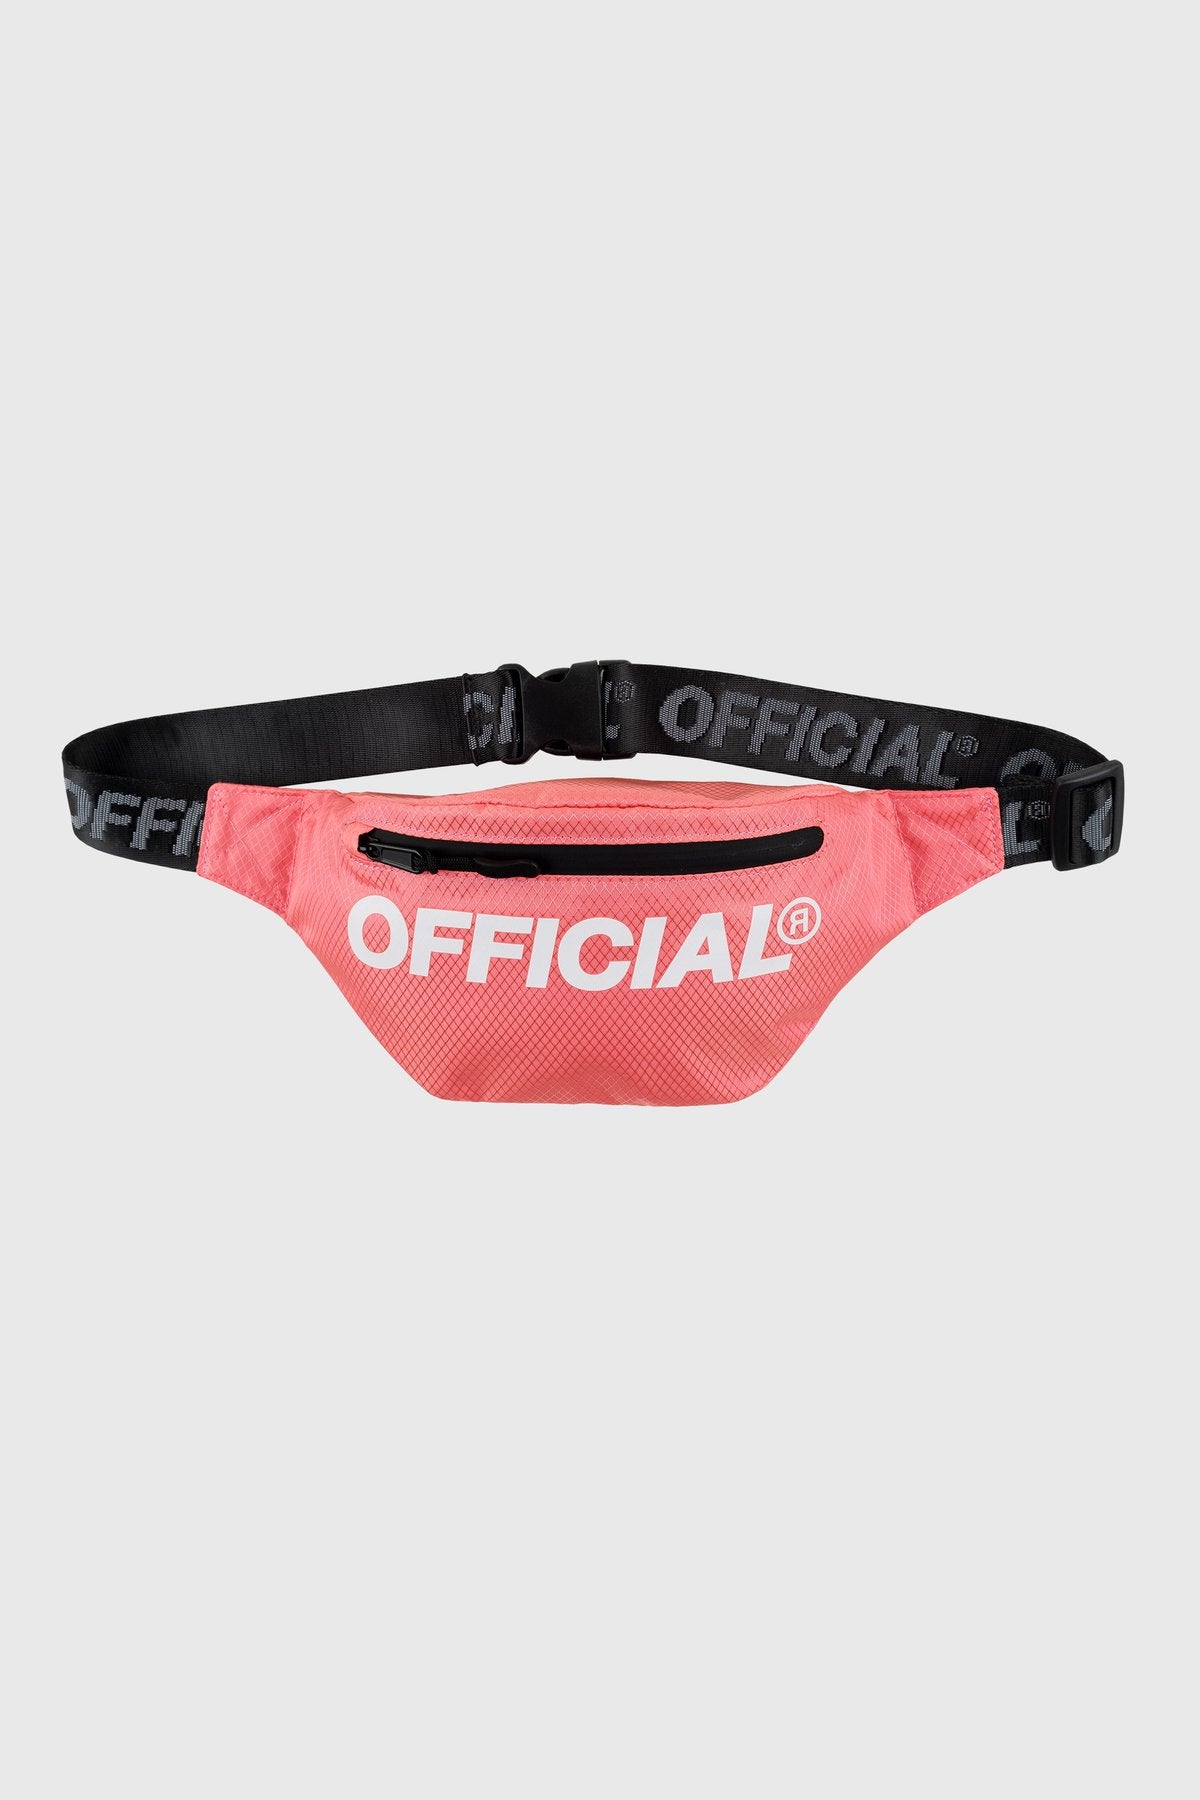 OFFICIAL Crossbody/Fanny Pack - Diamond Pink